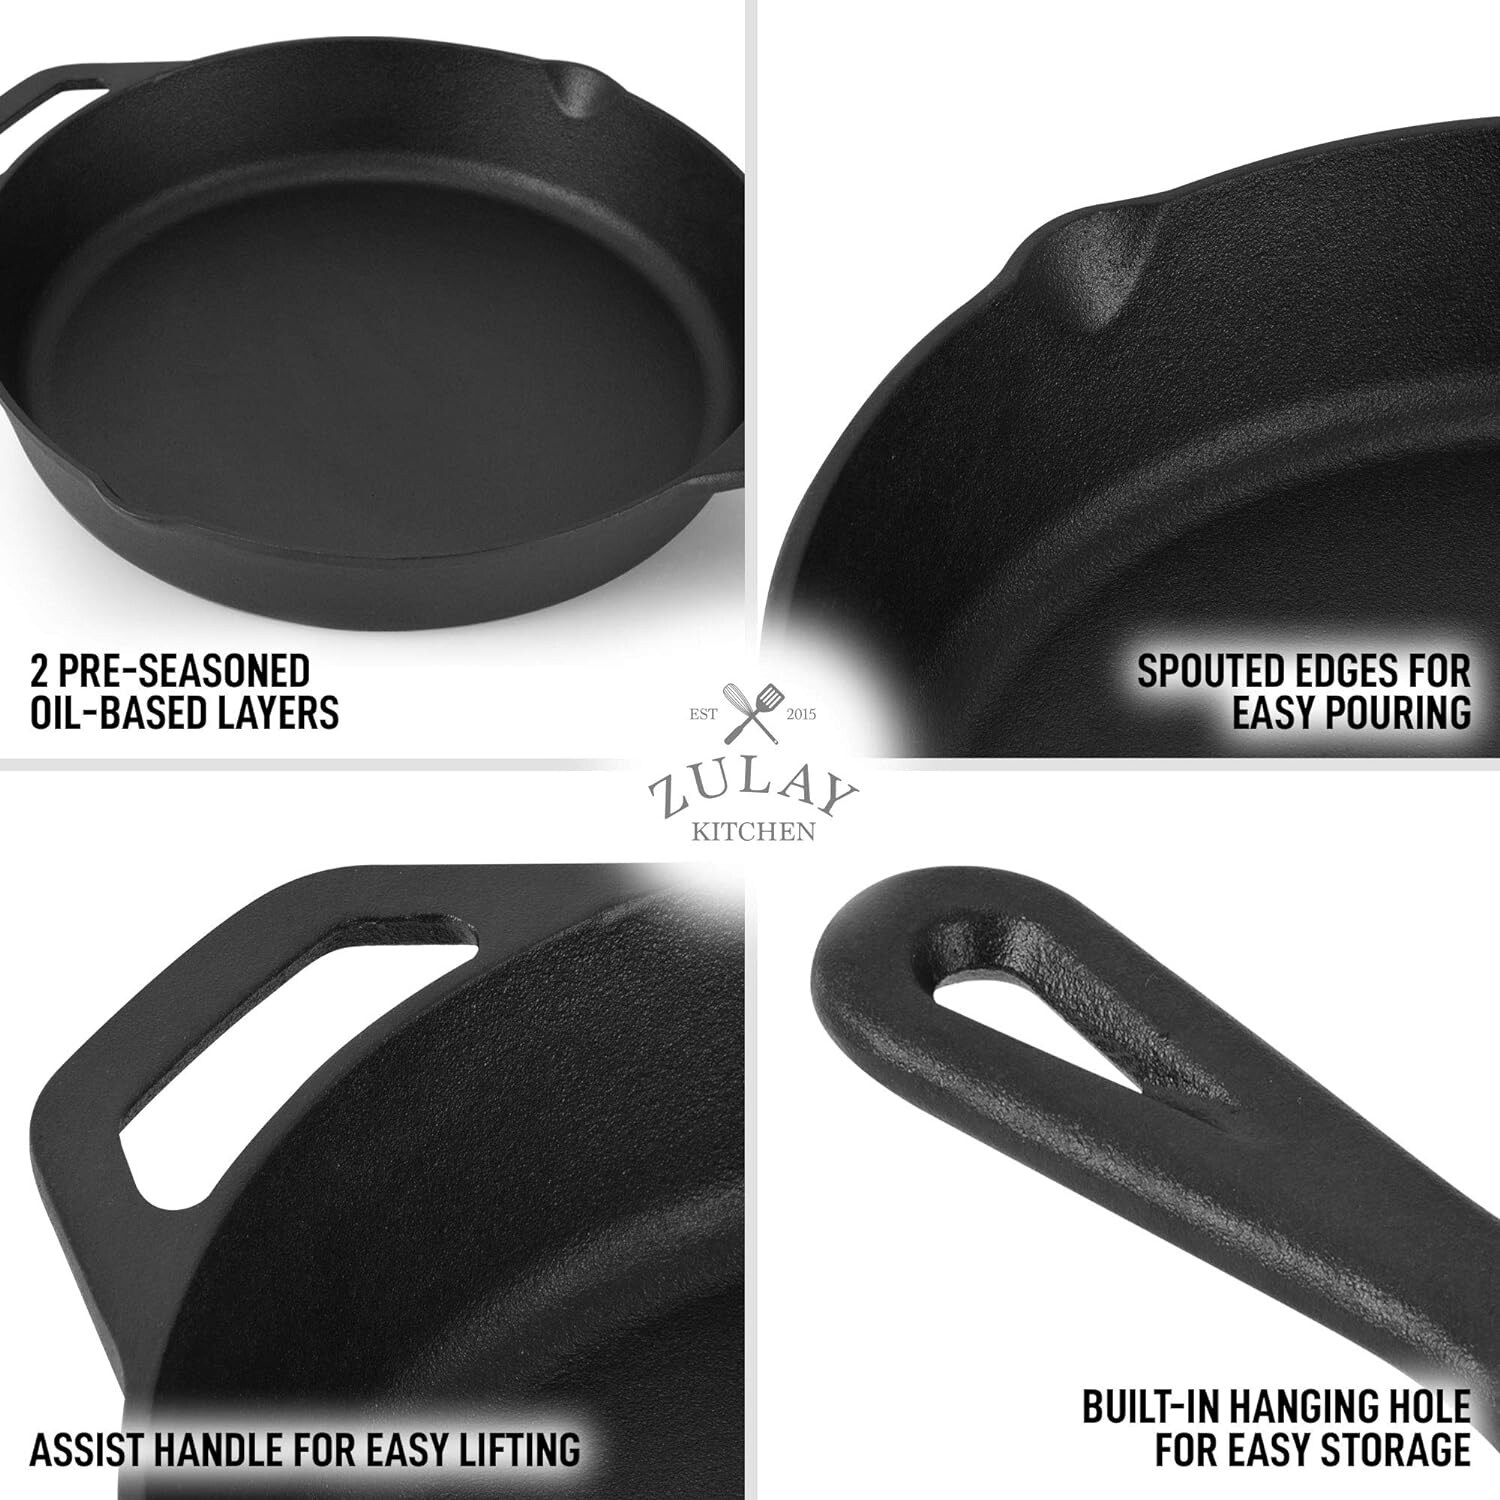 https://ak1.ostkcdn.com/images/products/is/images/direct/7bba3190b9ce267a7de477835bc42bcefe10bccf/Zulay-Kitchen-Pre-Seasoned-Cast-Iron-Skillet-12-Inch.jpg